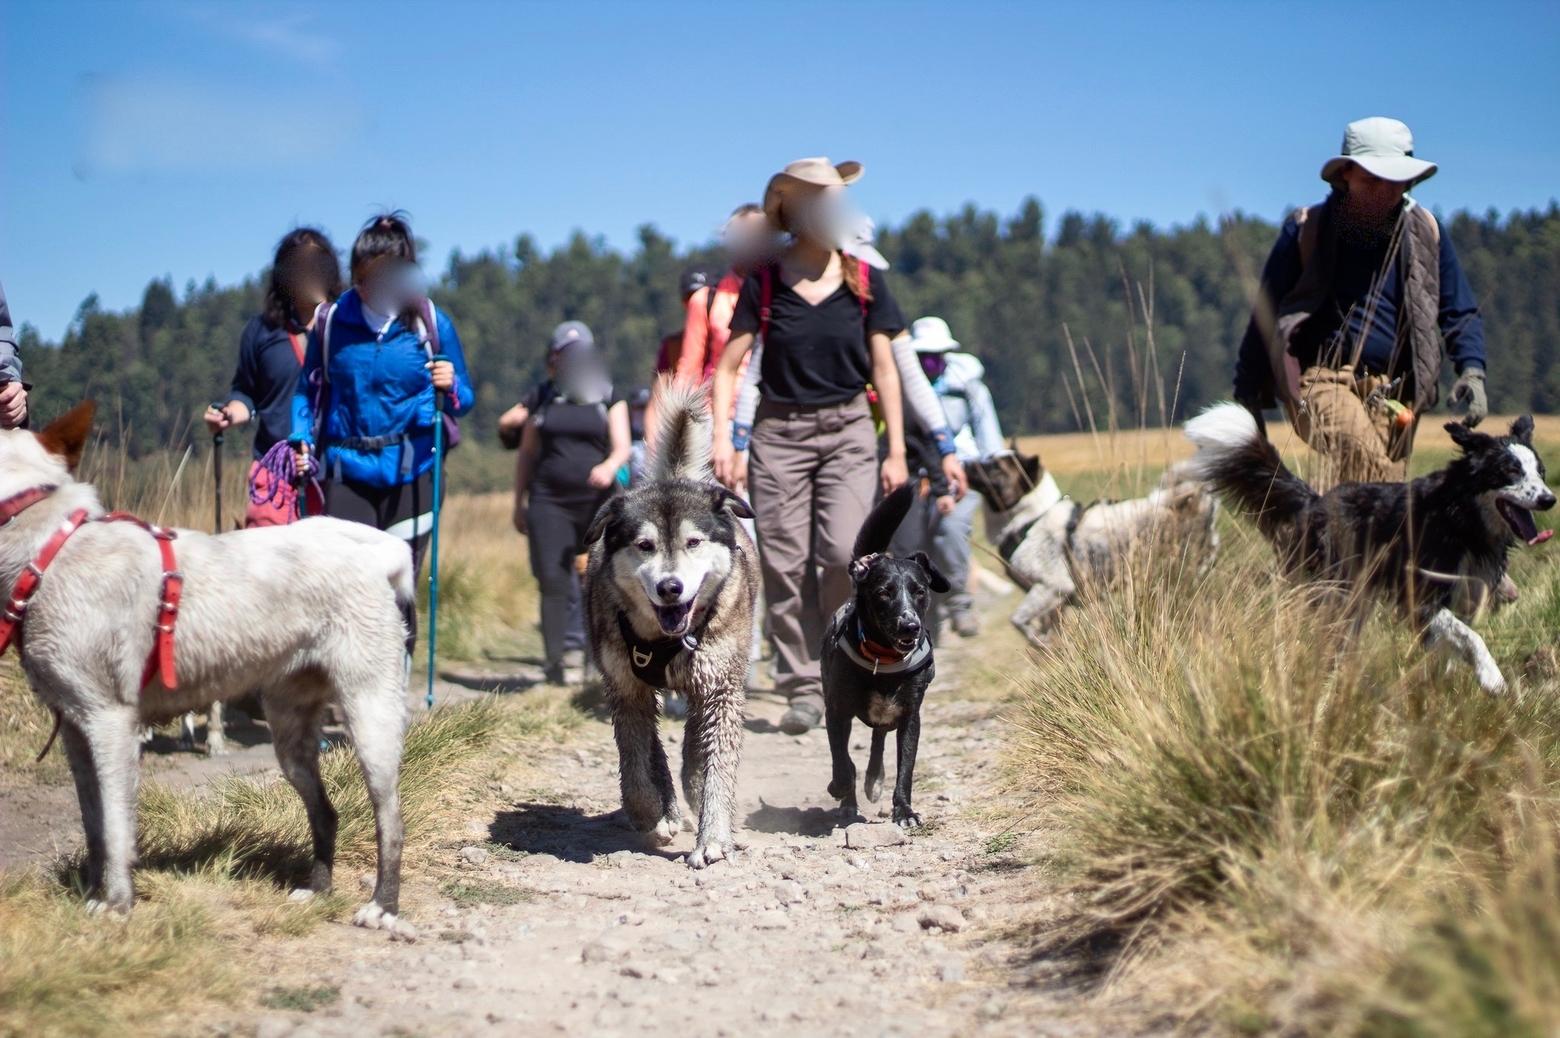 Hikers and a herd of dogs off leash coming down a backcountry trail. Studies show that when people are accompanied by dogs the flight response from wildlife is markedly amplified and in some cases may cause resident wild animals to be permanently uprooted. Screenshot obtained on Facebook 